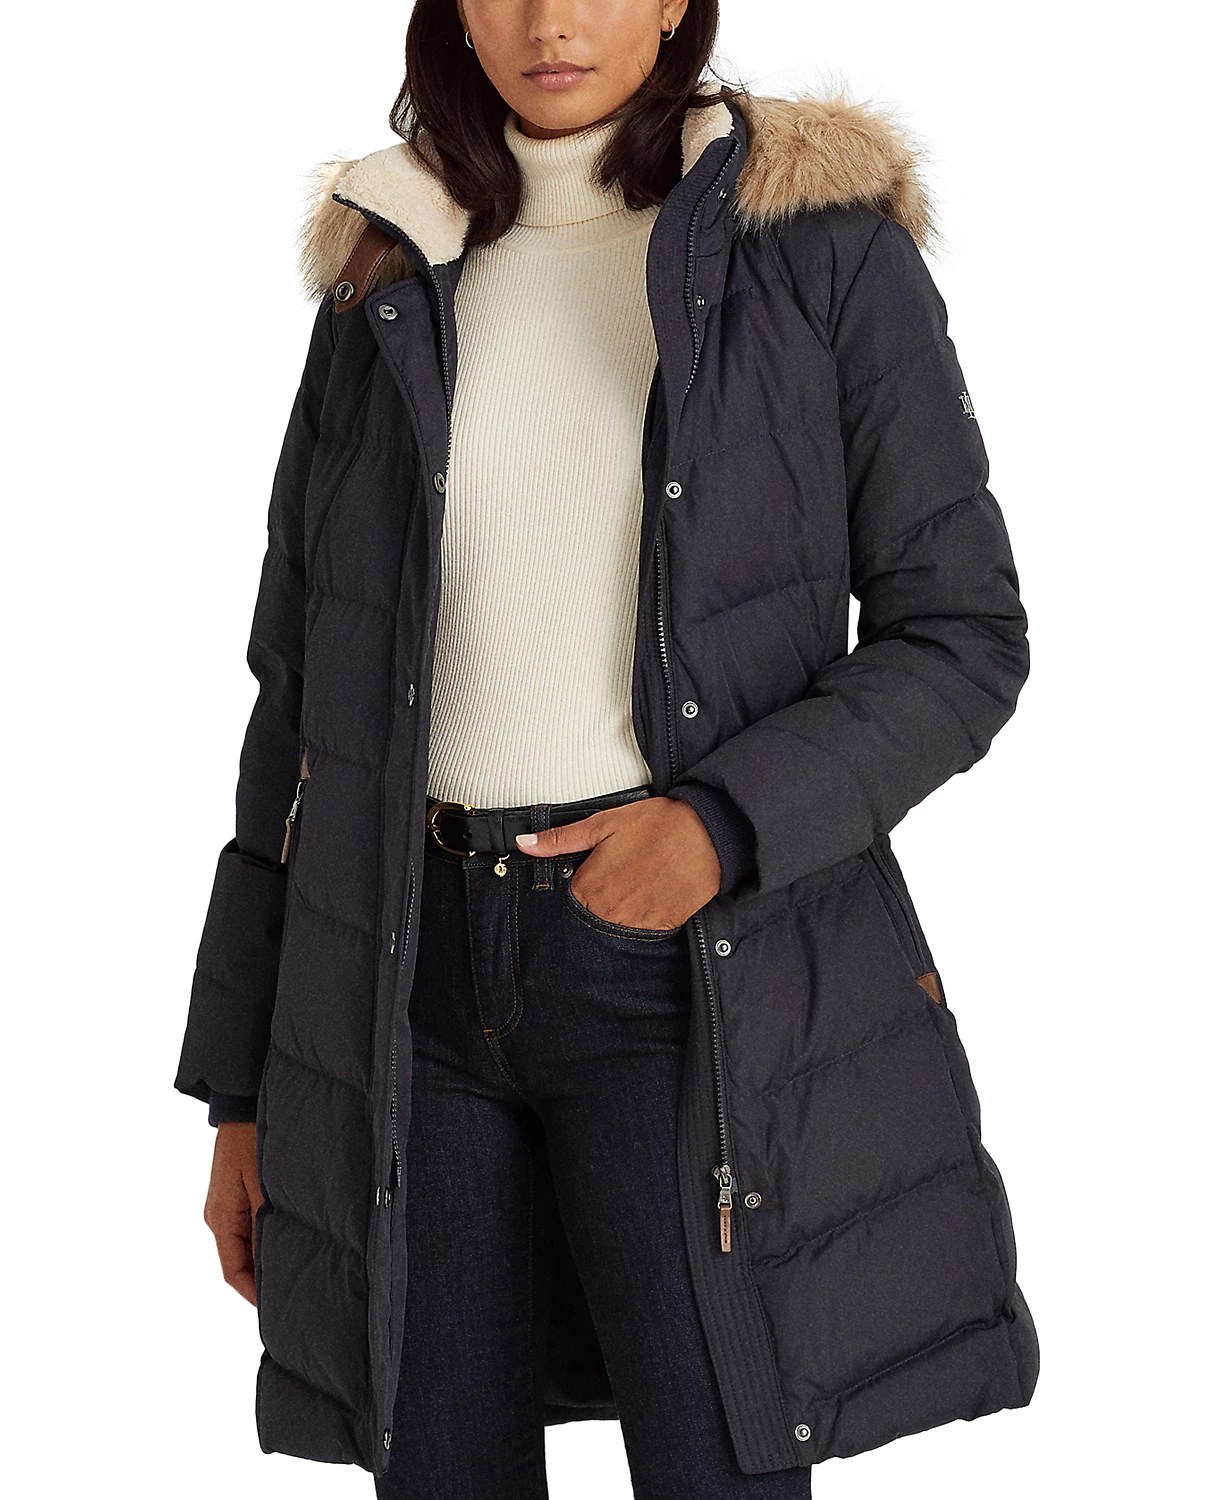 Macy's Has So Many Winter Coats on Sale for Up to 64% Off